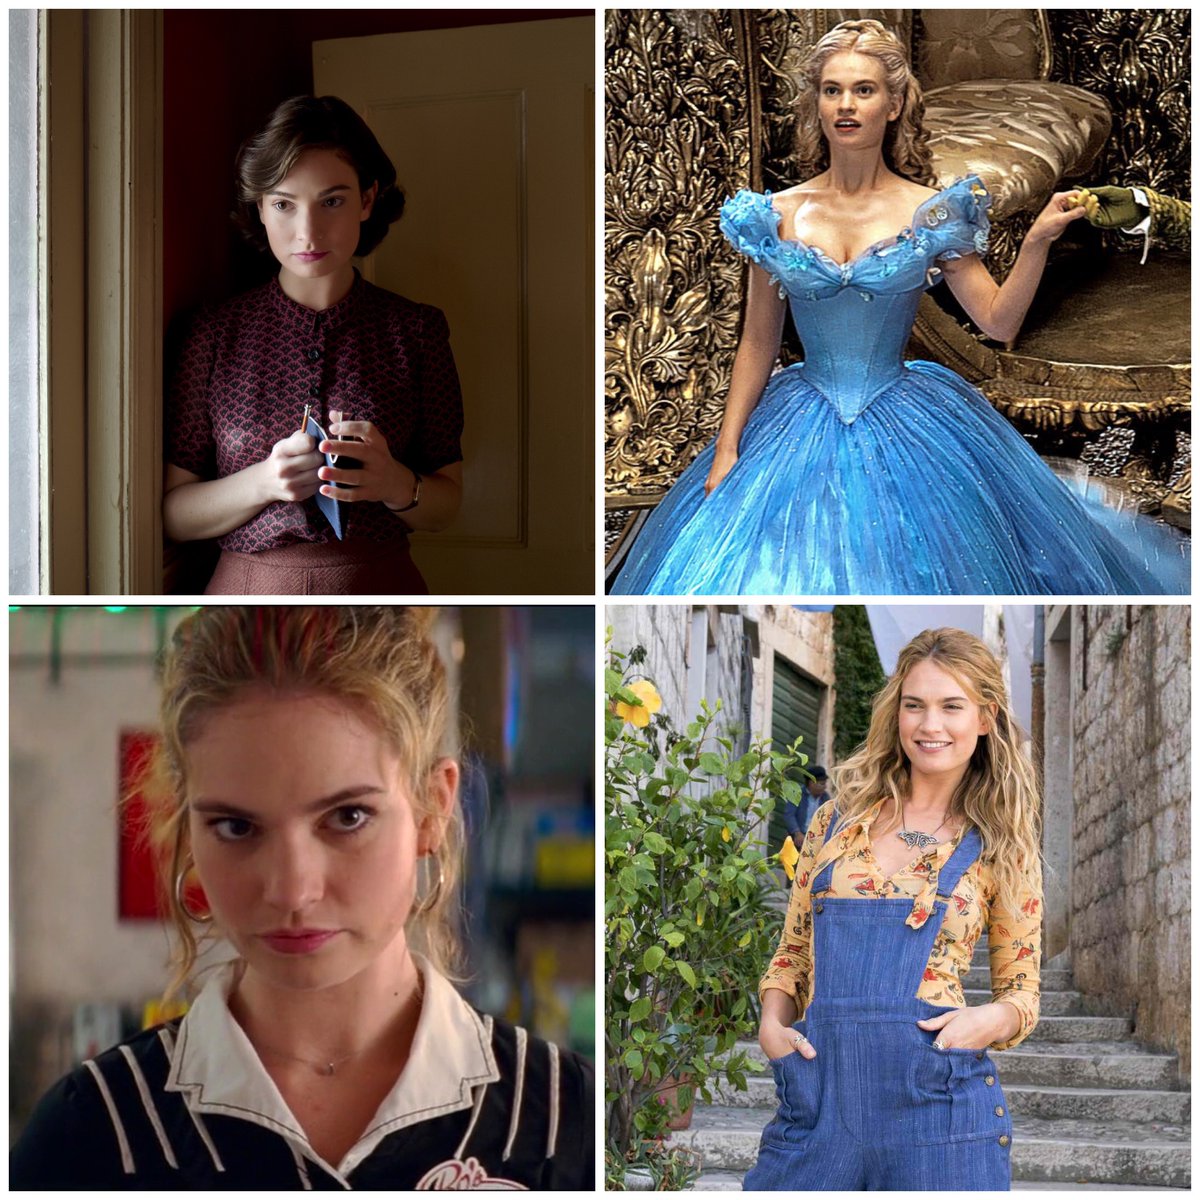 Happy birthday to Lily James🎂 

The actress turns 35 today. 

#LilyJames